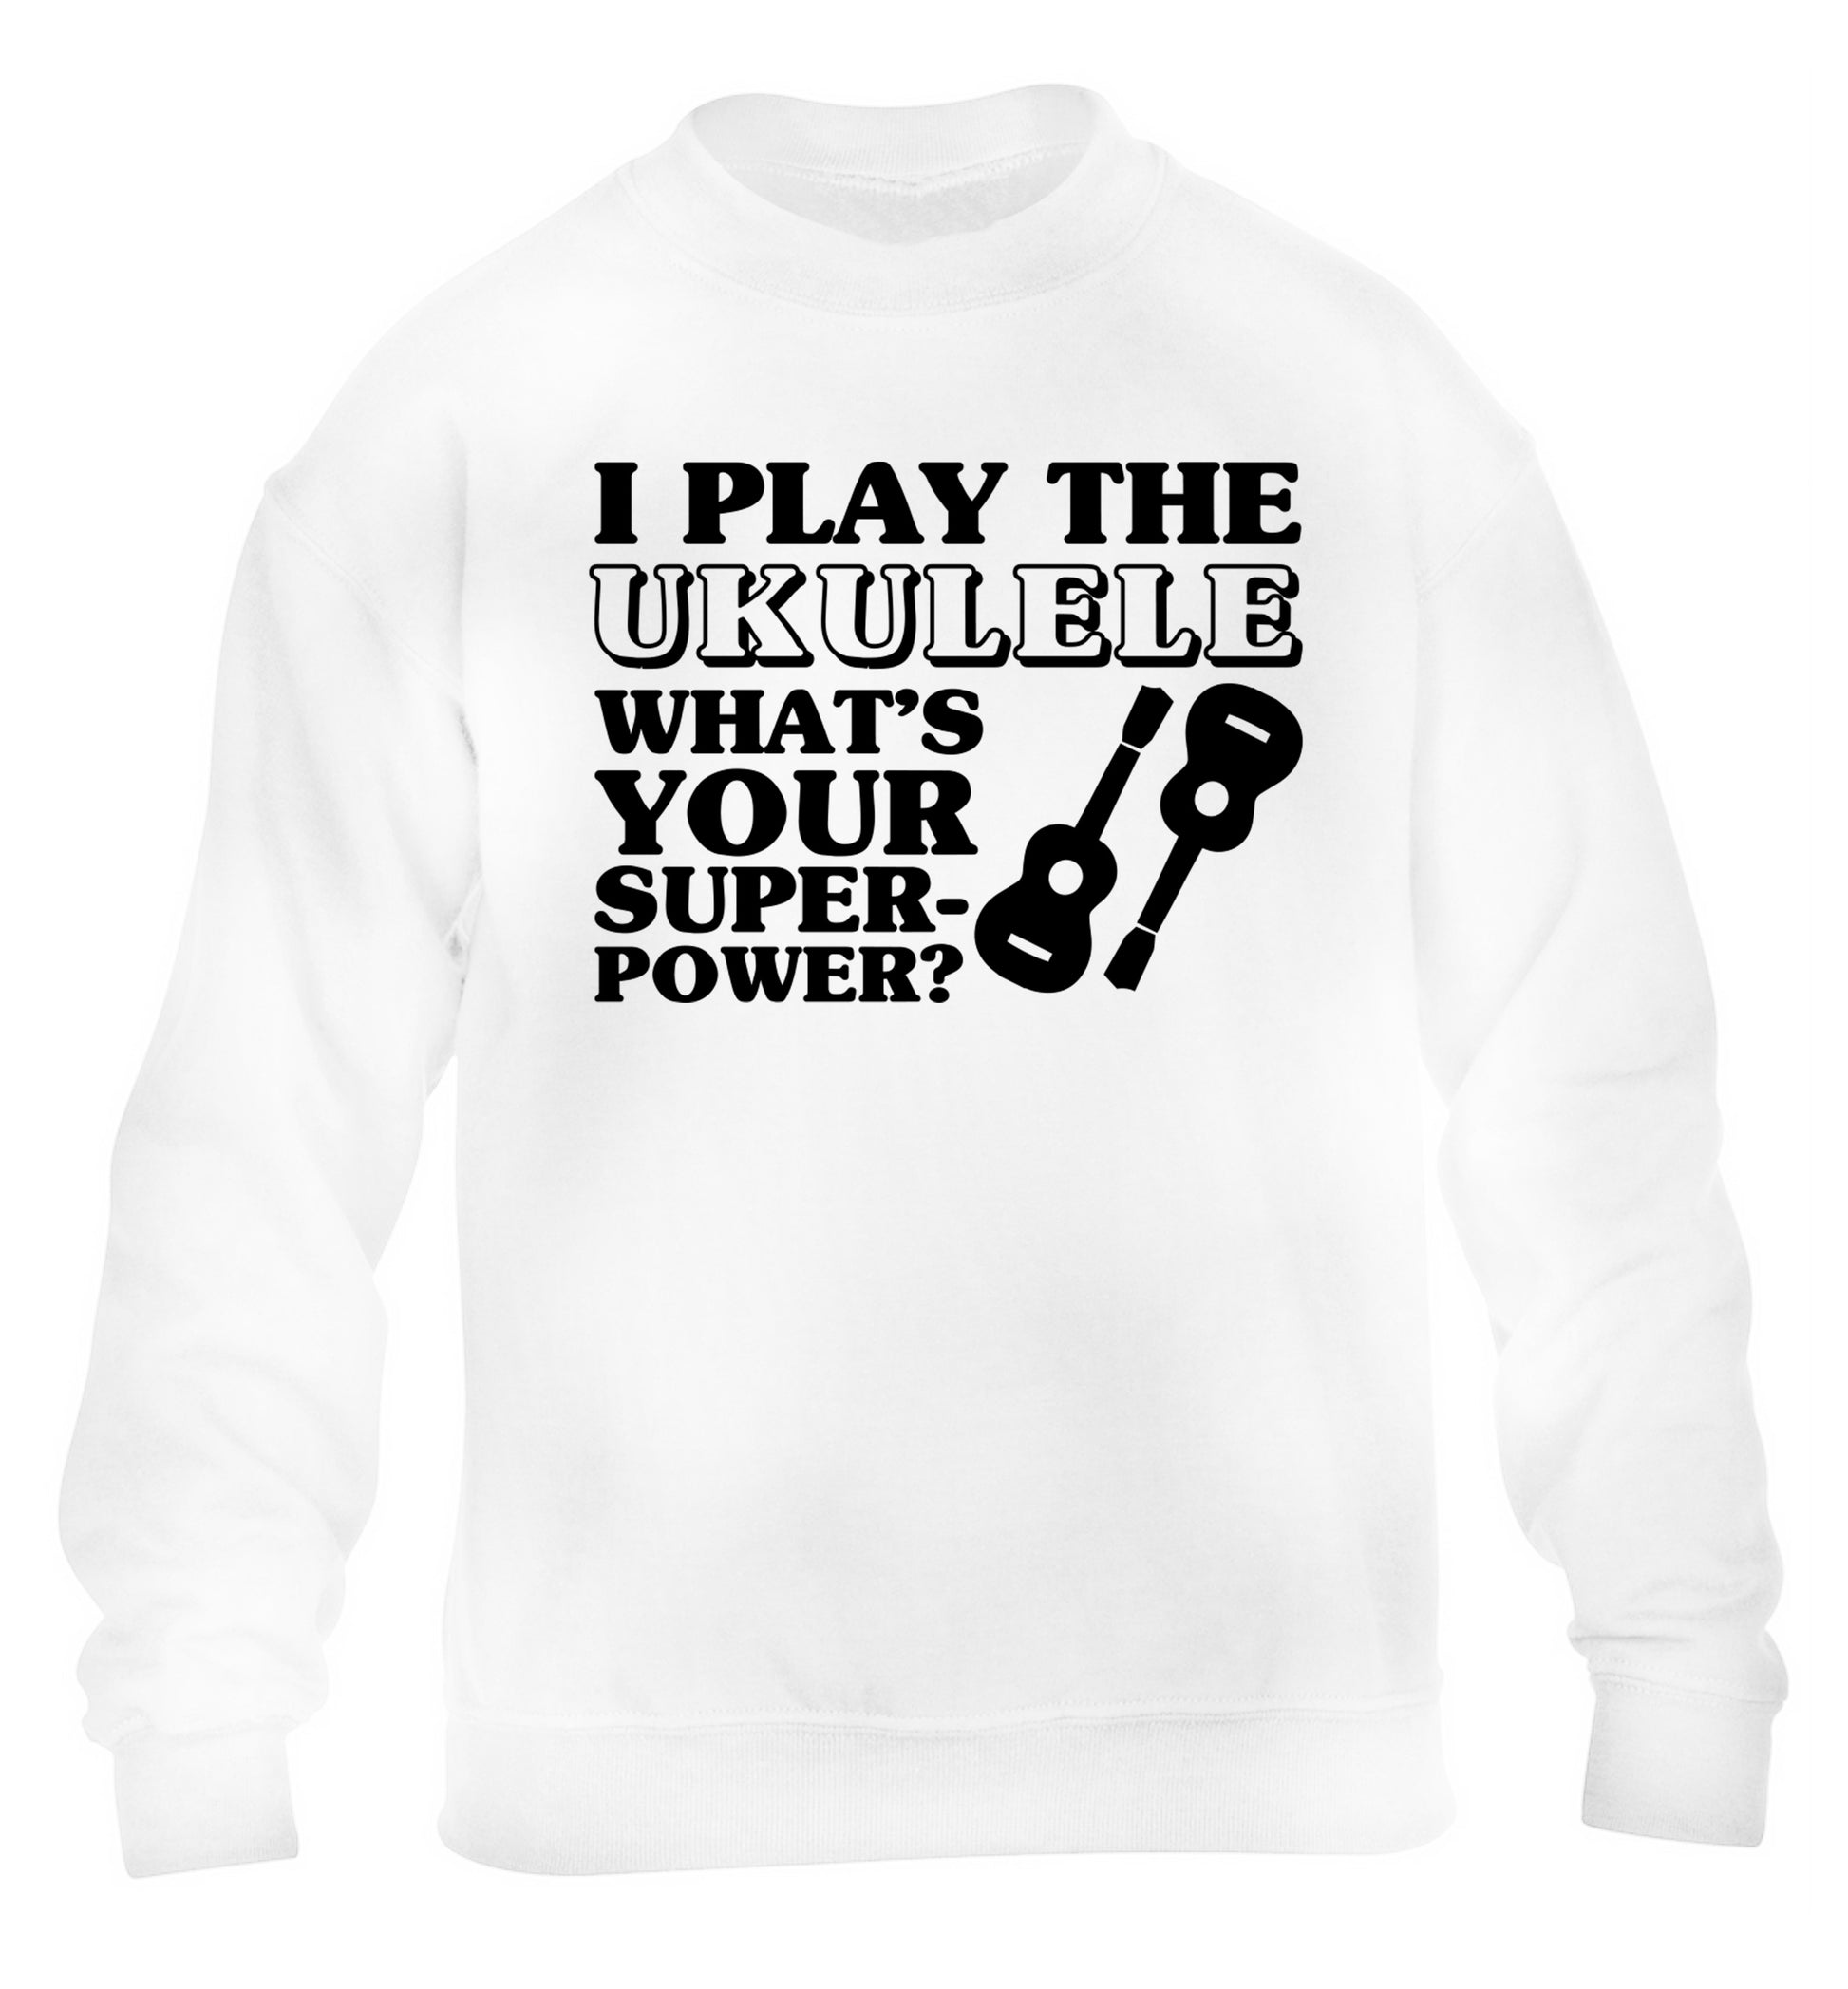 I play the ukulele what's your superpower? children's white sweater 12-14 Years